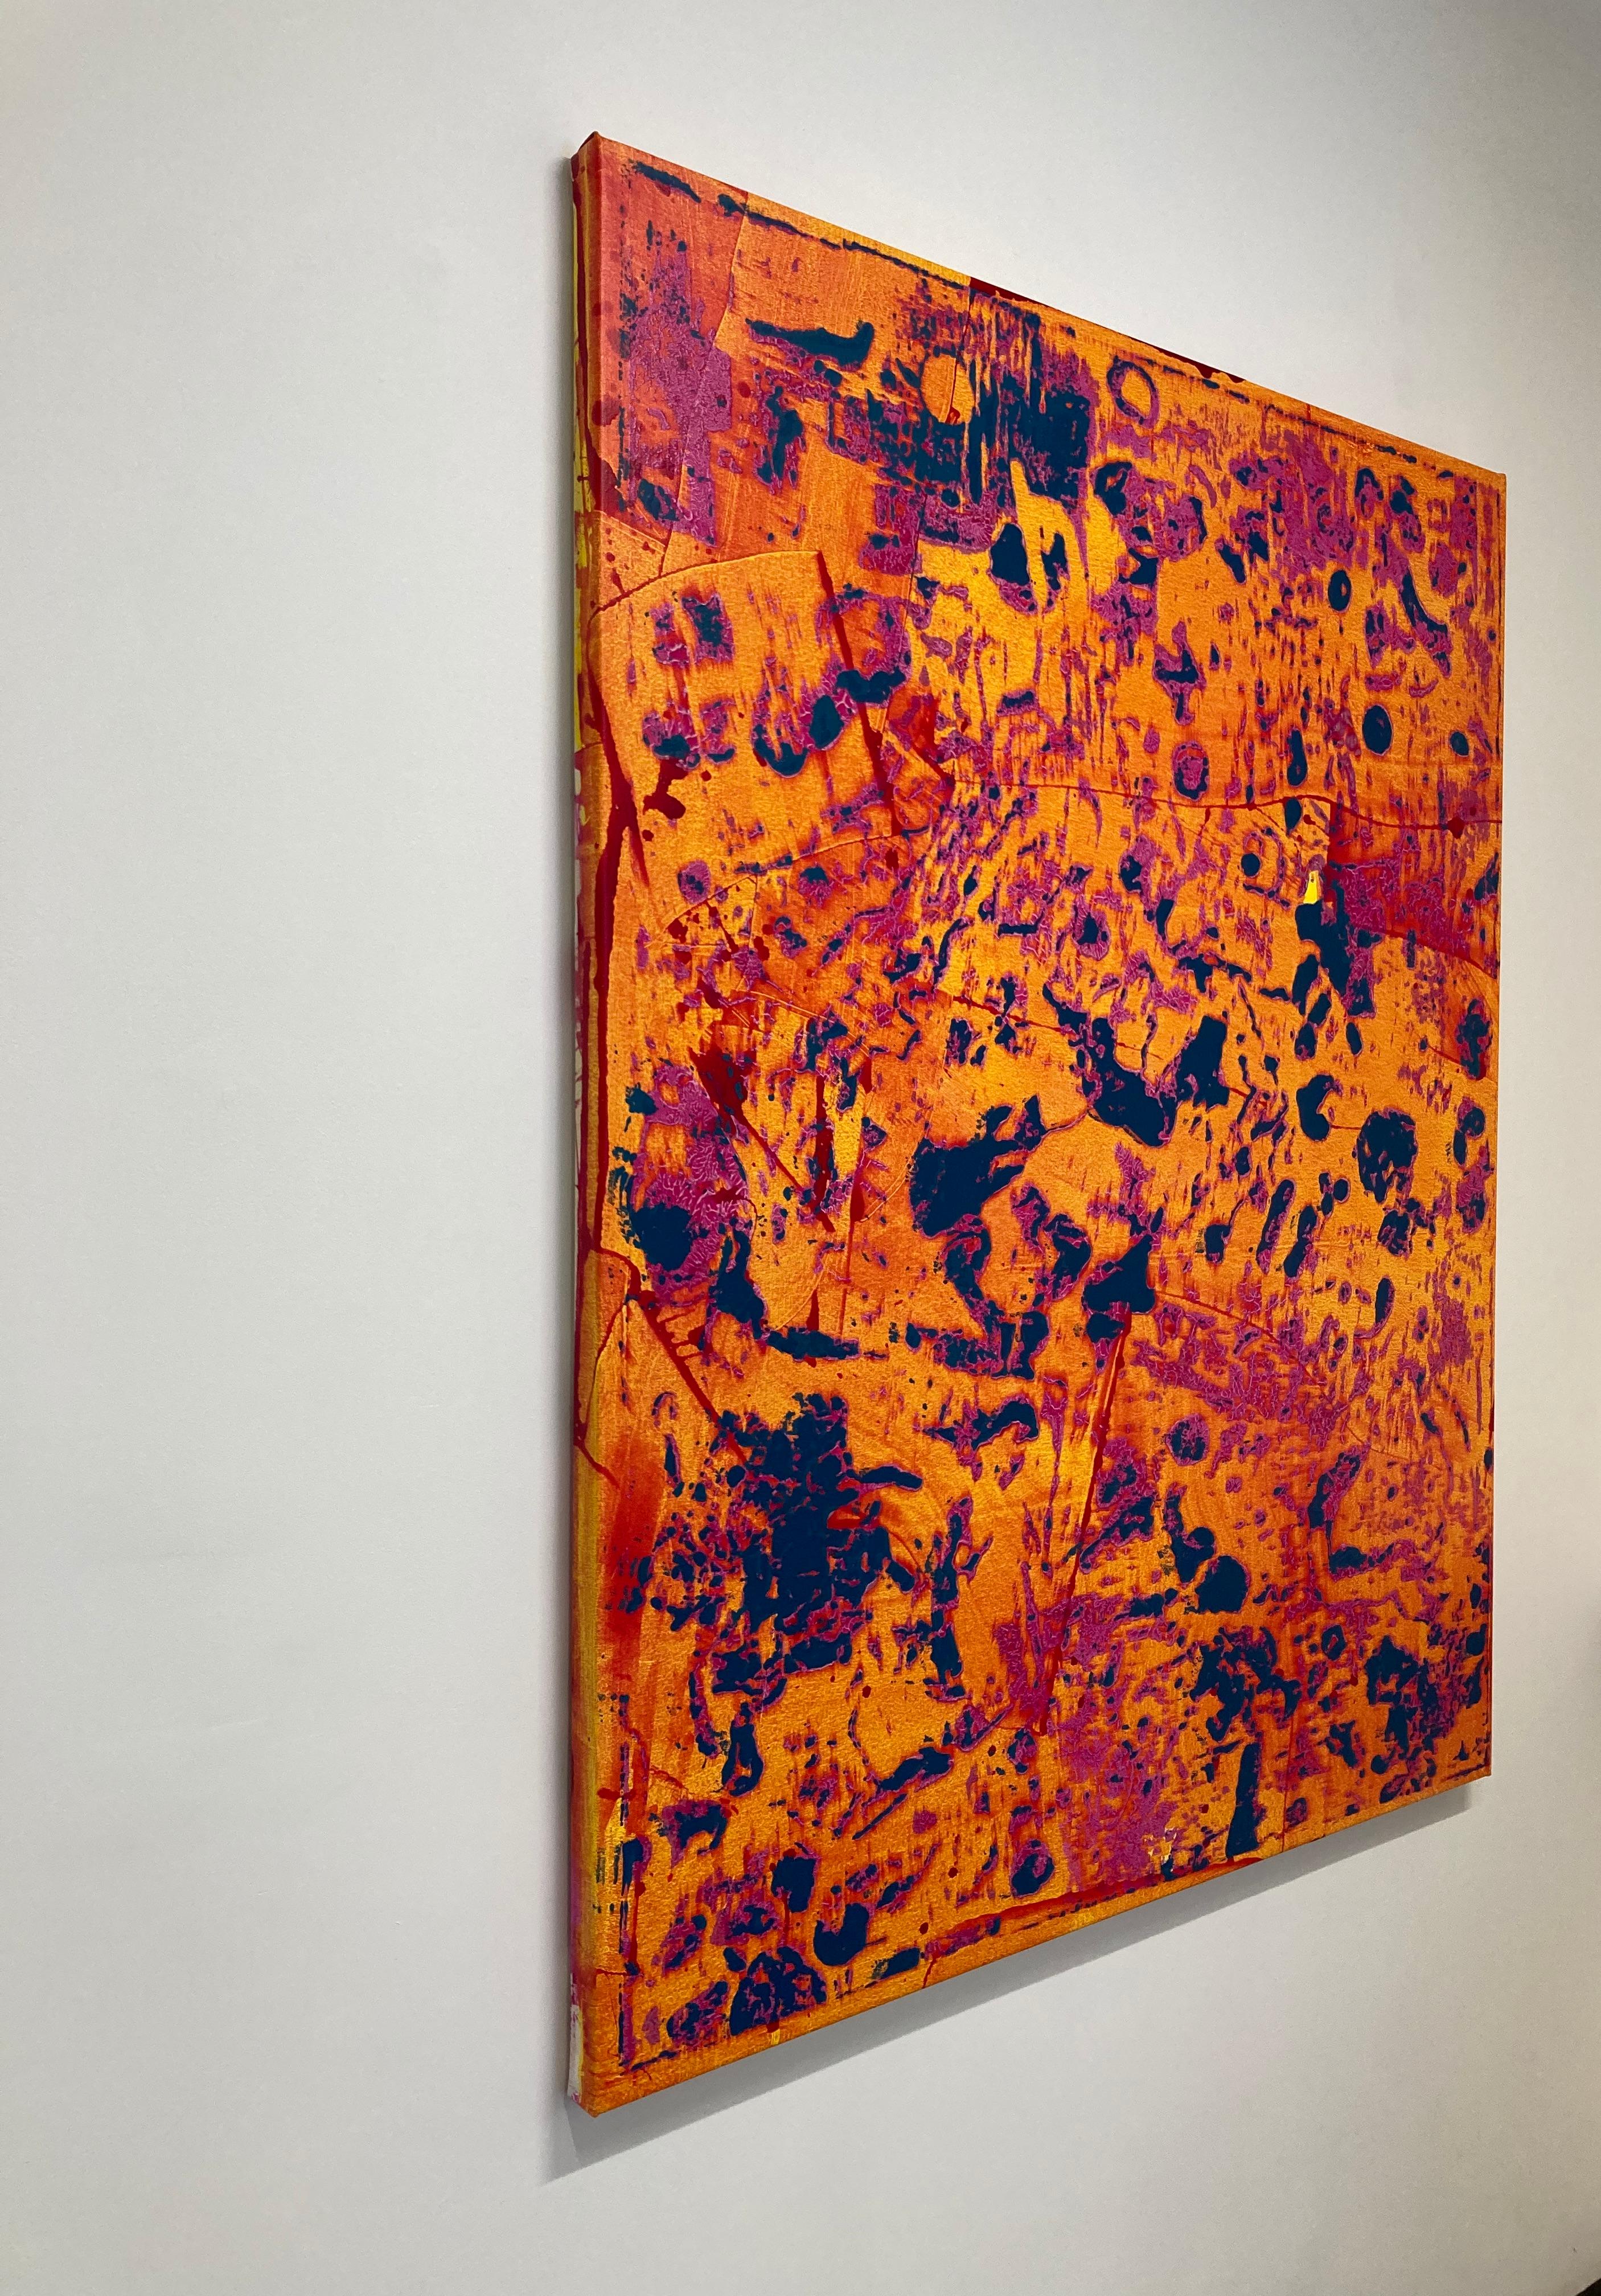 P20-0105, Large Vertical Abstract Painting in Bright Orange, Yellow, Pink, Navy 1